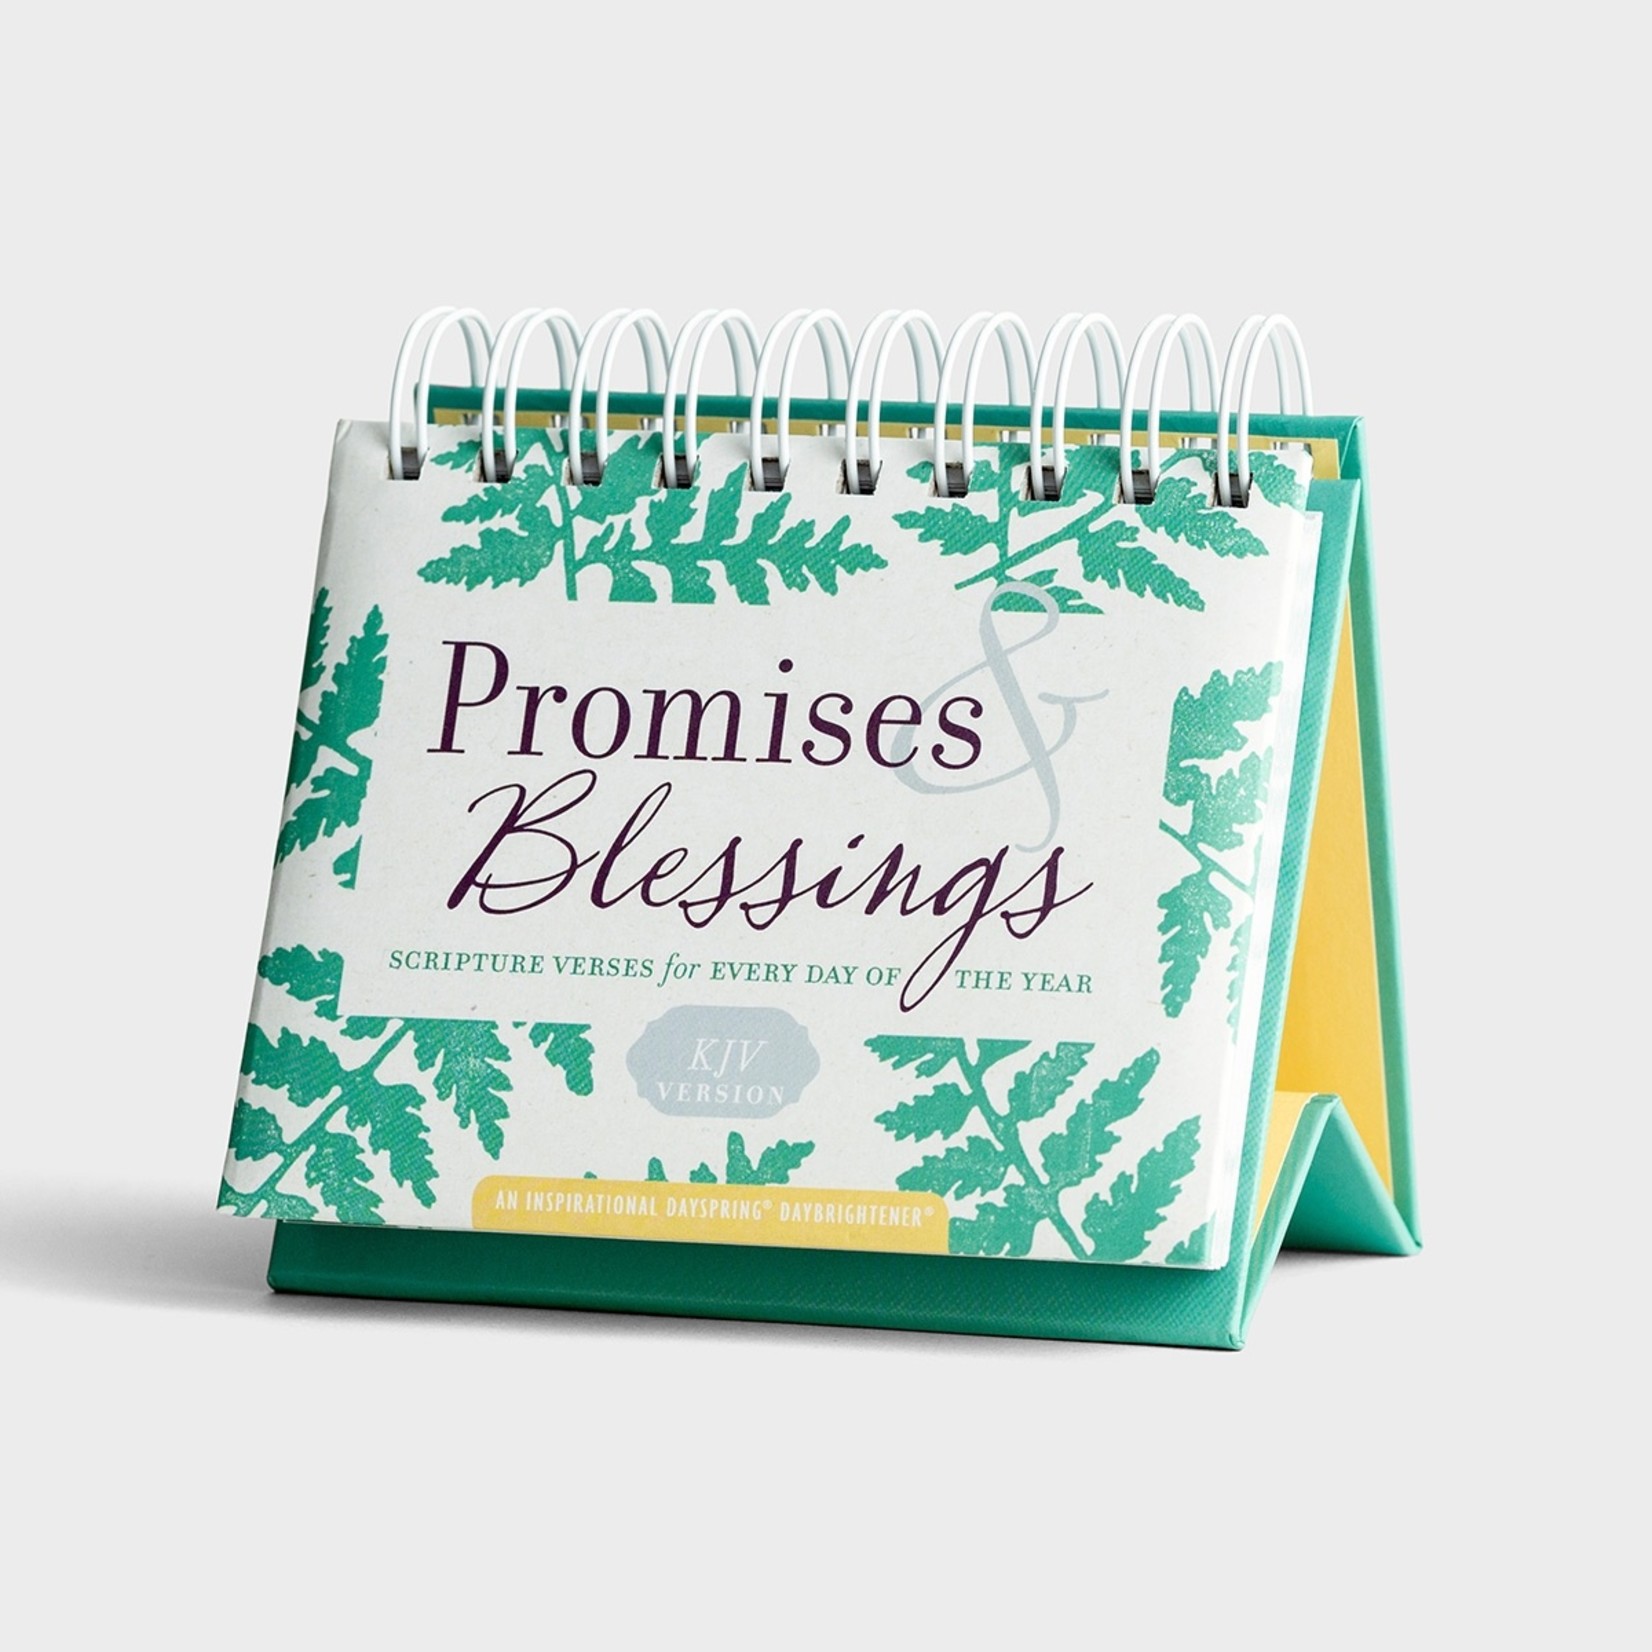 DaySpring Promises & Blessings: Scripture Verses for Every Day of the Year - KJV - Perpetual Calendar